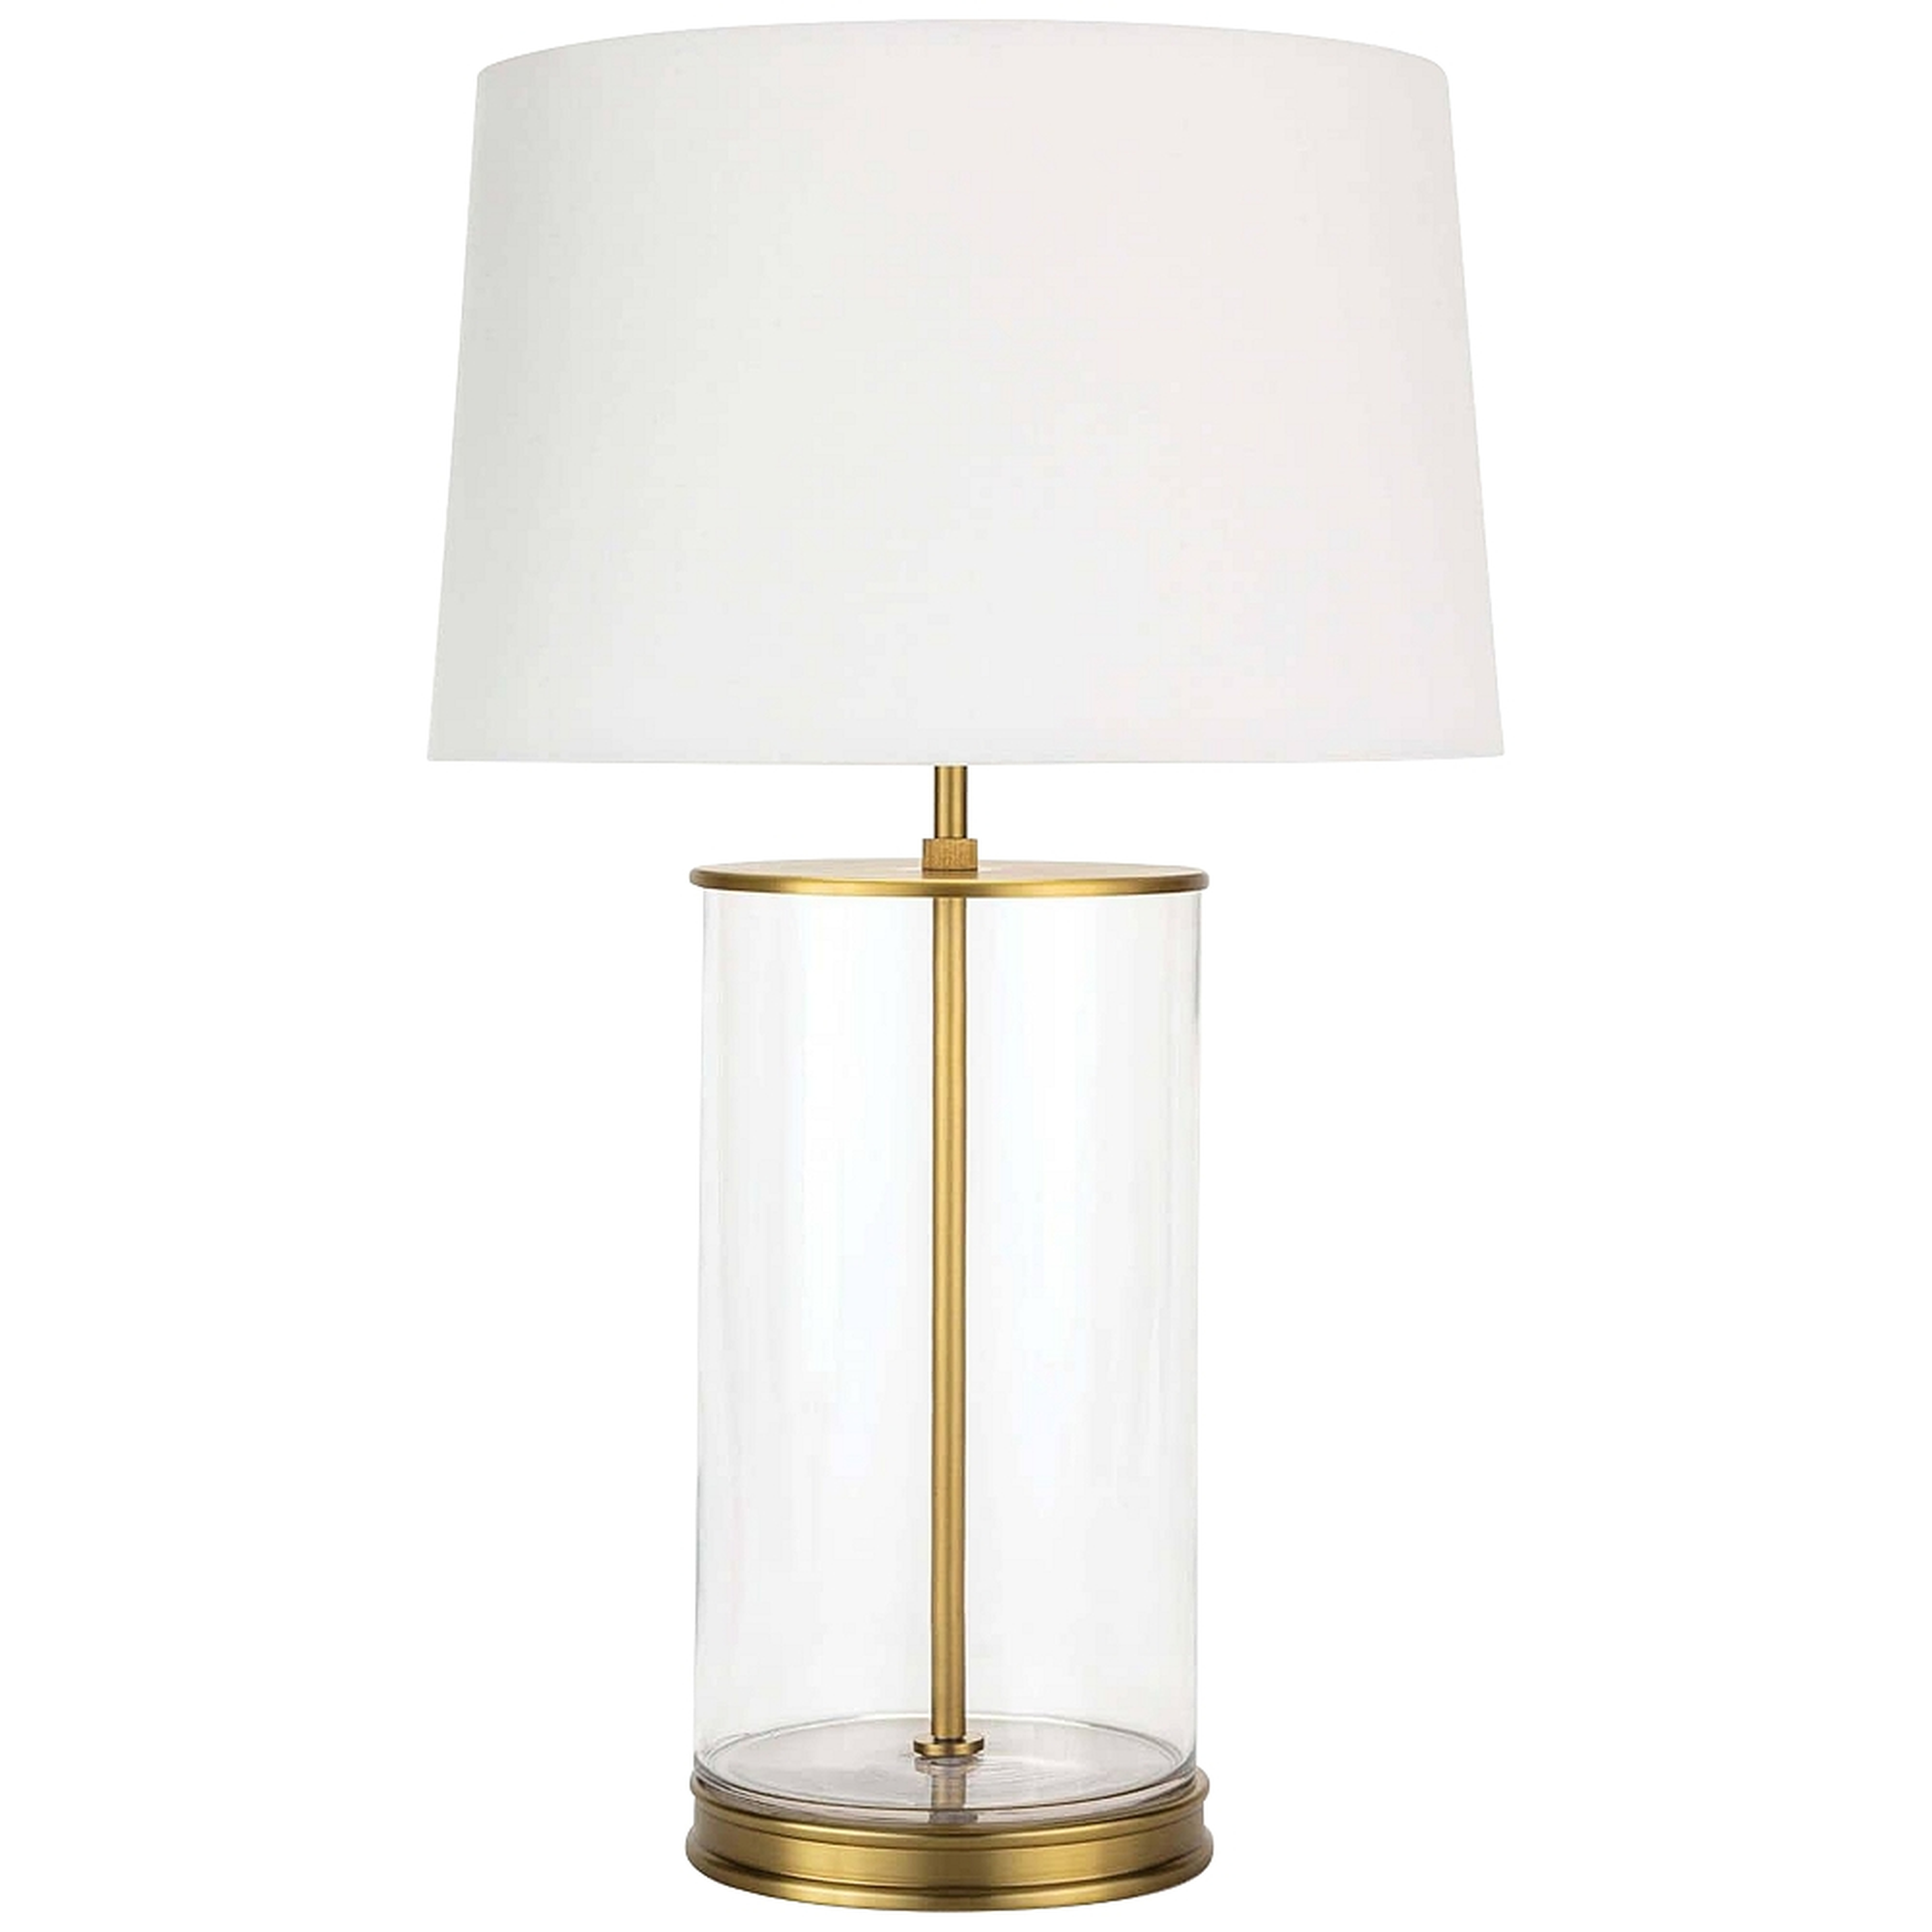 Regina Andrew Design Magelian Natural Brass Glass Table Lamp - Style # 96M51 - Lamps Plus